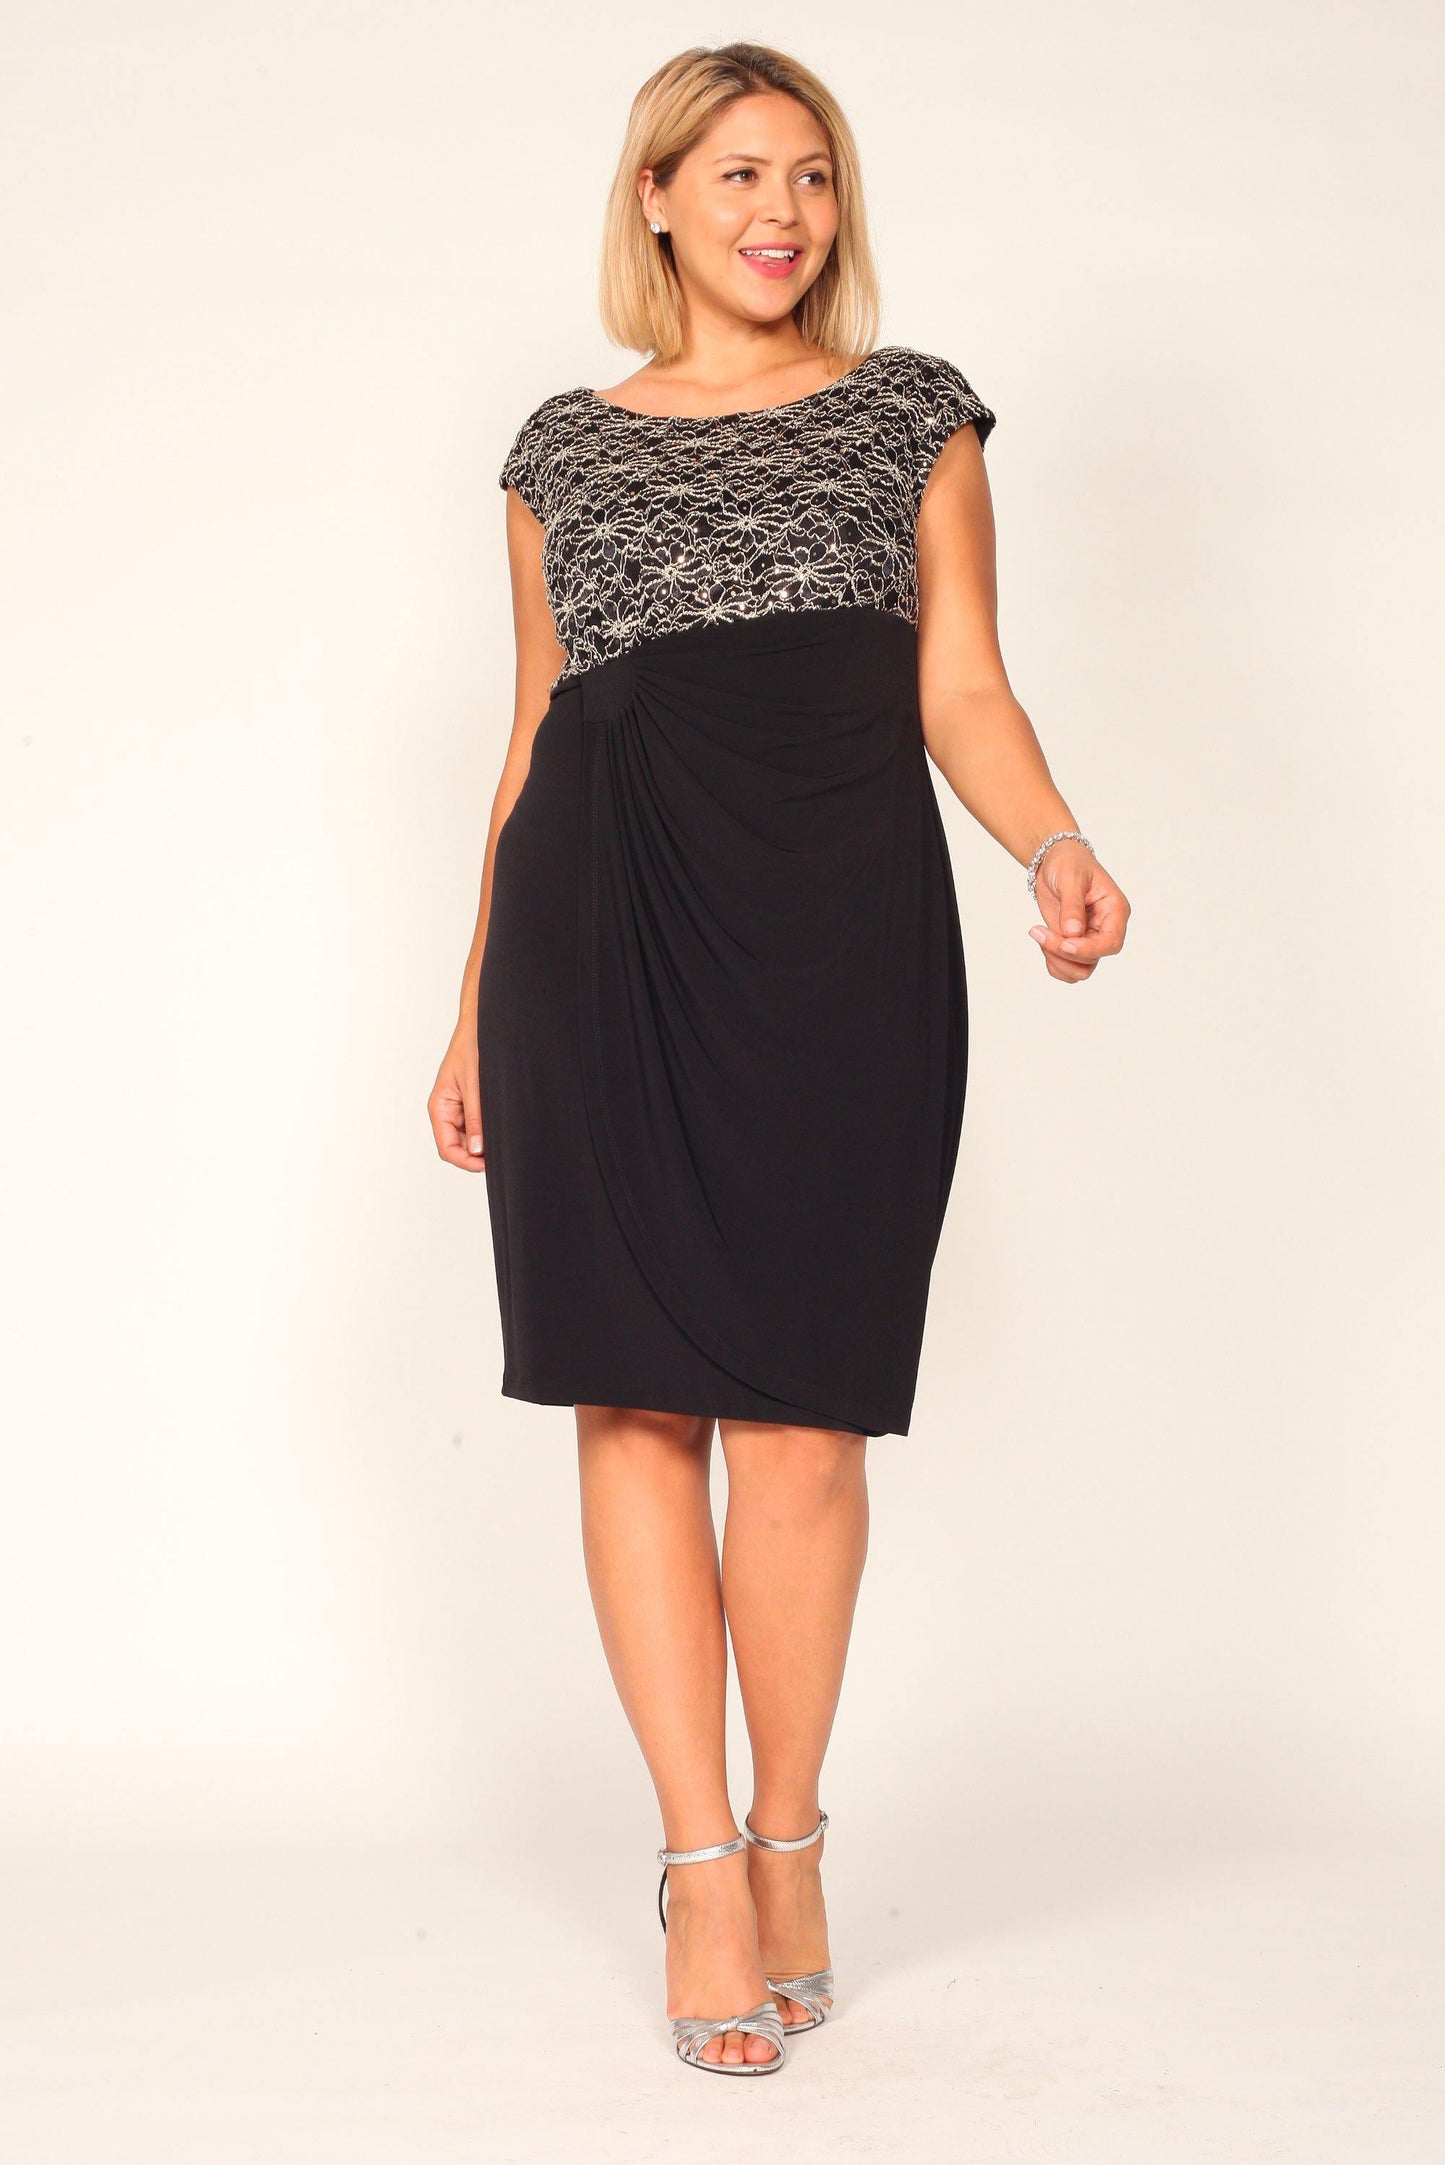 Connected Apparel Short Dress Cocktail - The Dress Outlet